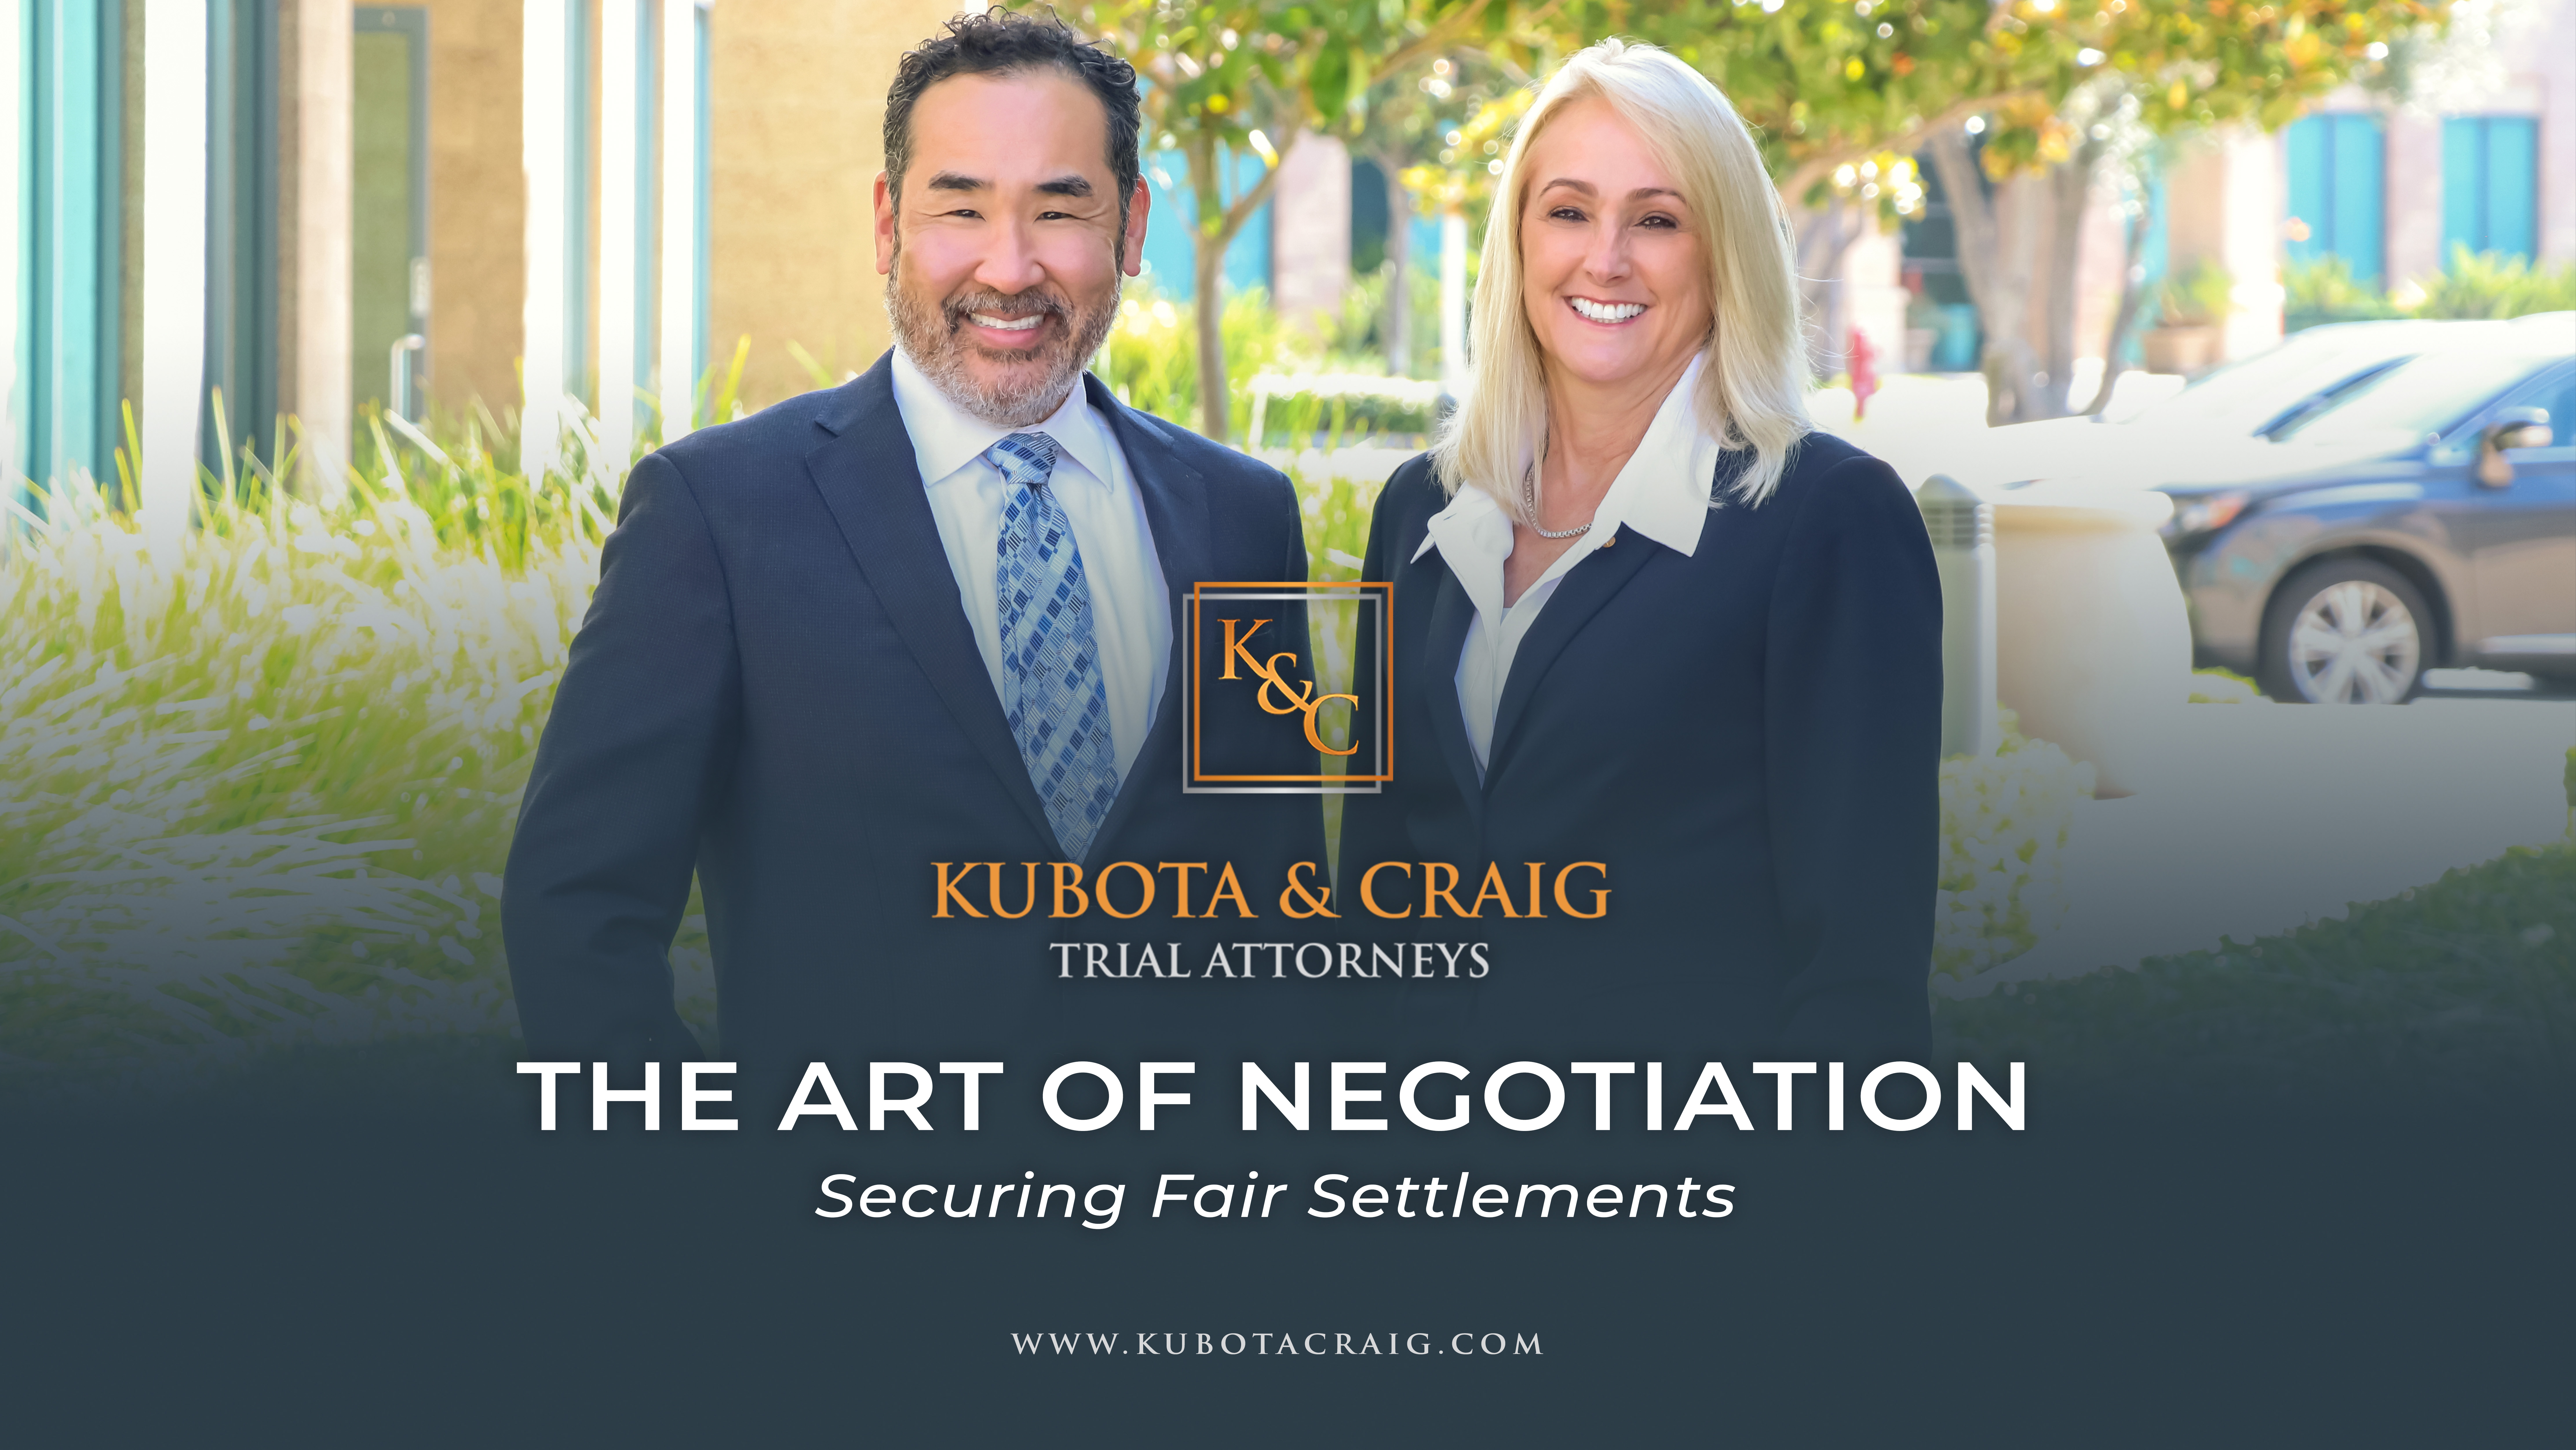 The Art of Negotiation: Securing Fair Settlements by Kubota & Craig Injury Attorneys in Irvine CA